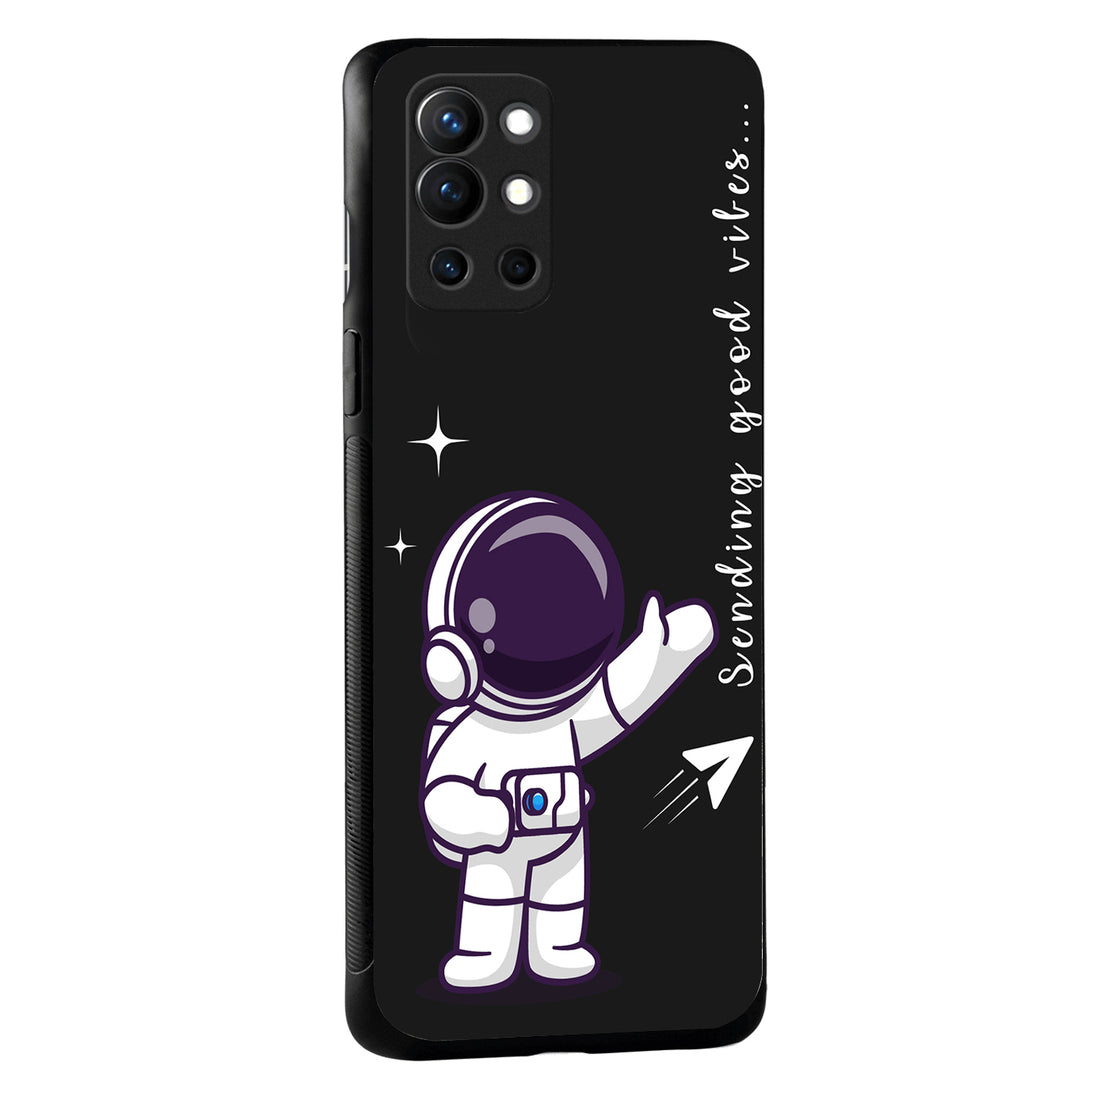 Spending Good Vibes Bff Oneplus 9 R Back Case